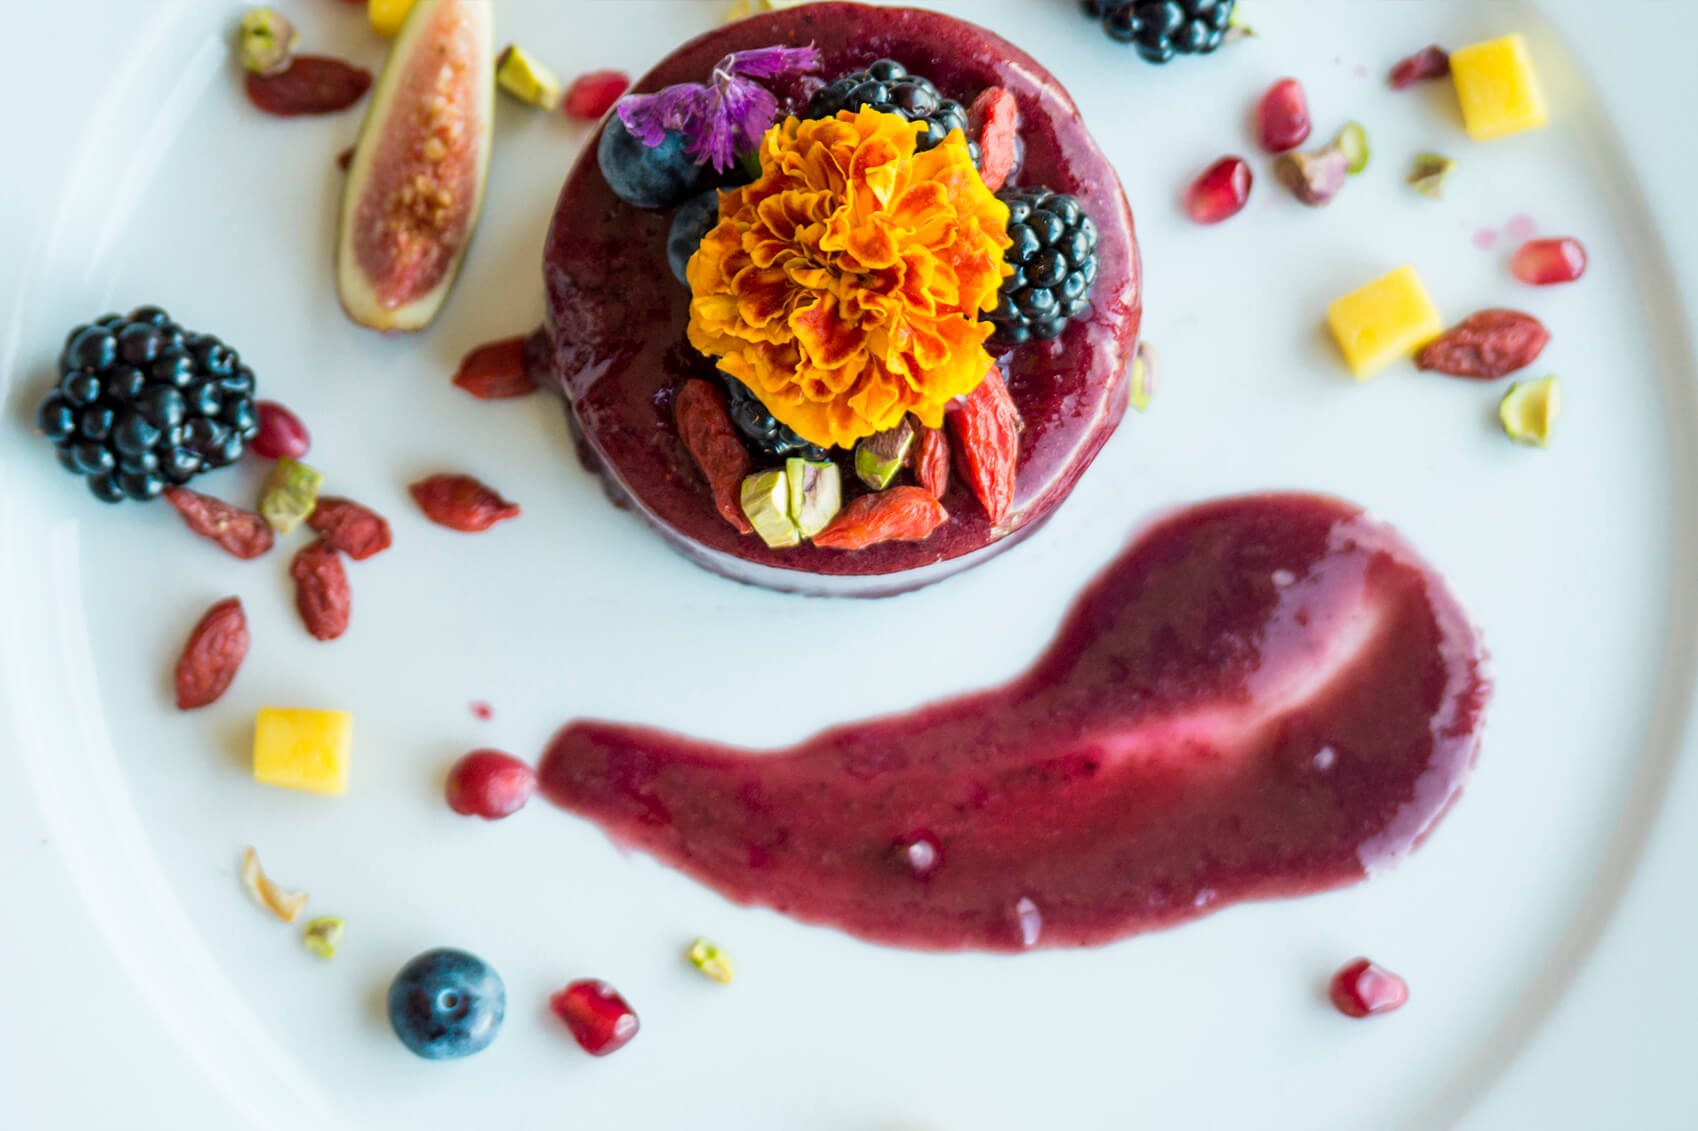 Edible flowers, fresh fruit and whipped cream make great garnishes for this sorbet.